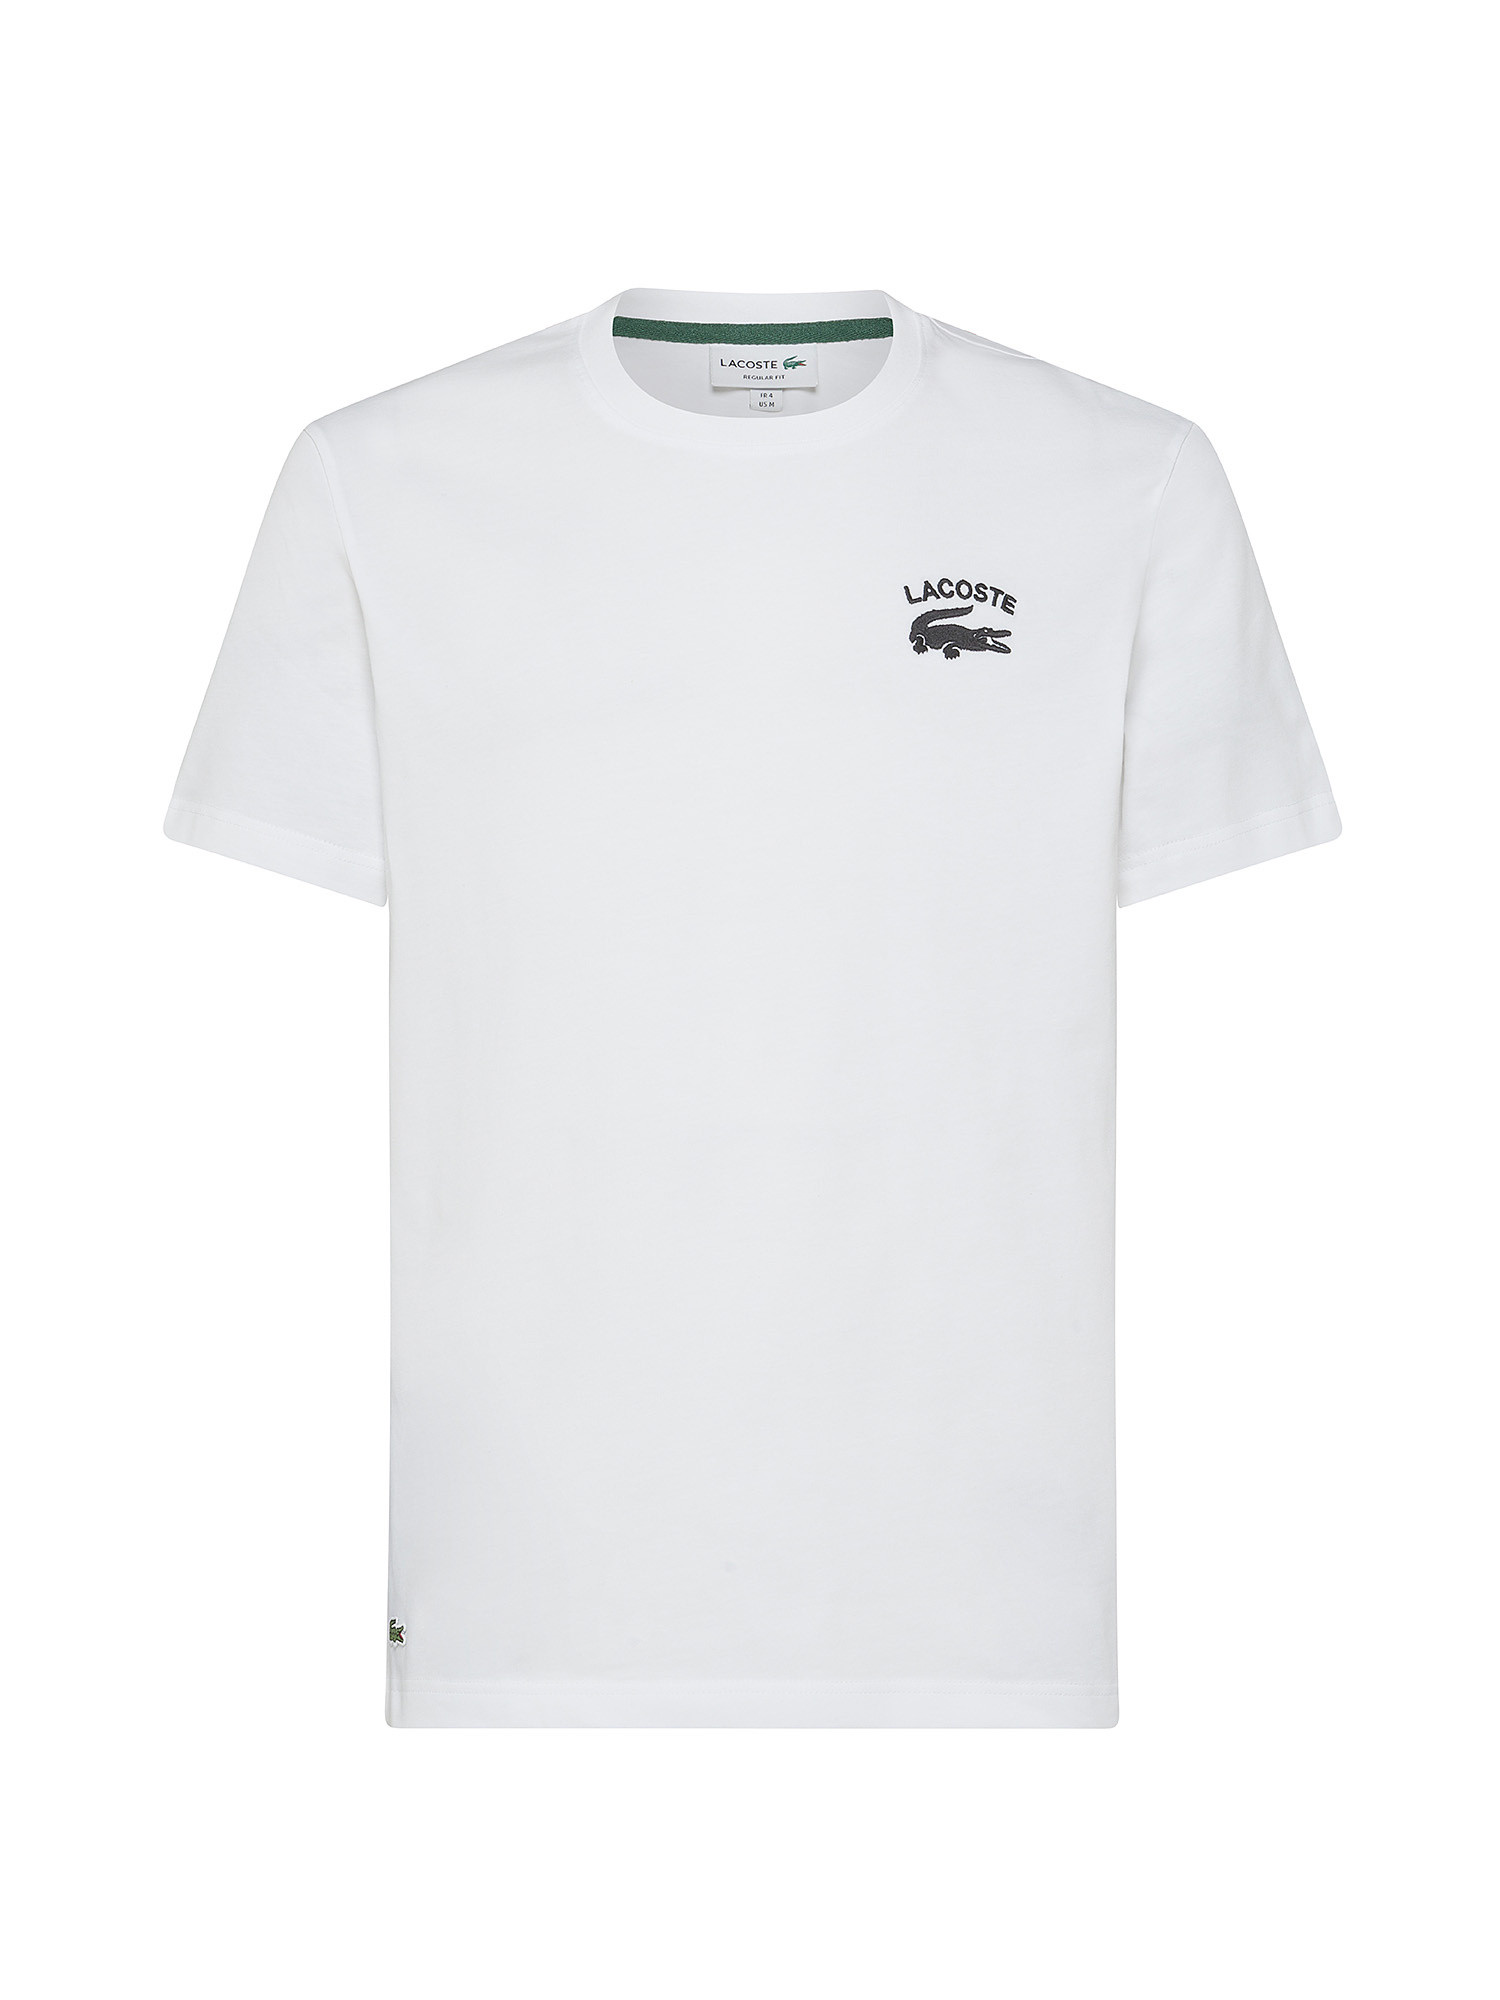 Lacoste - T-shirt in jersey di cotone, Bianco, large image number 0